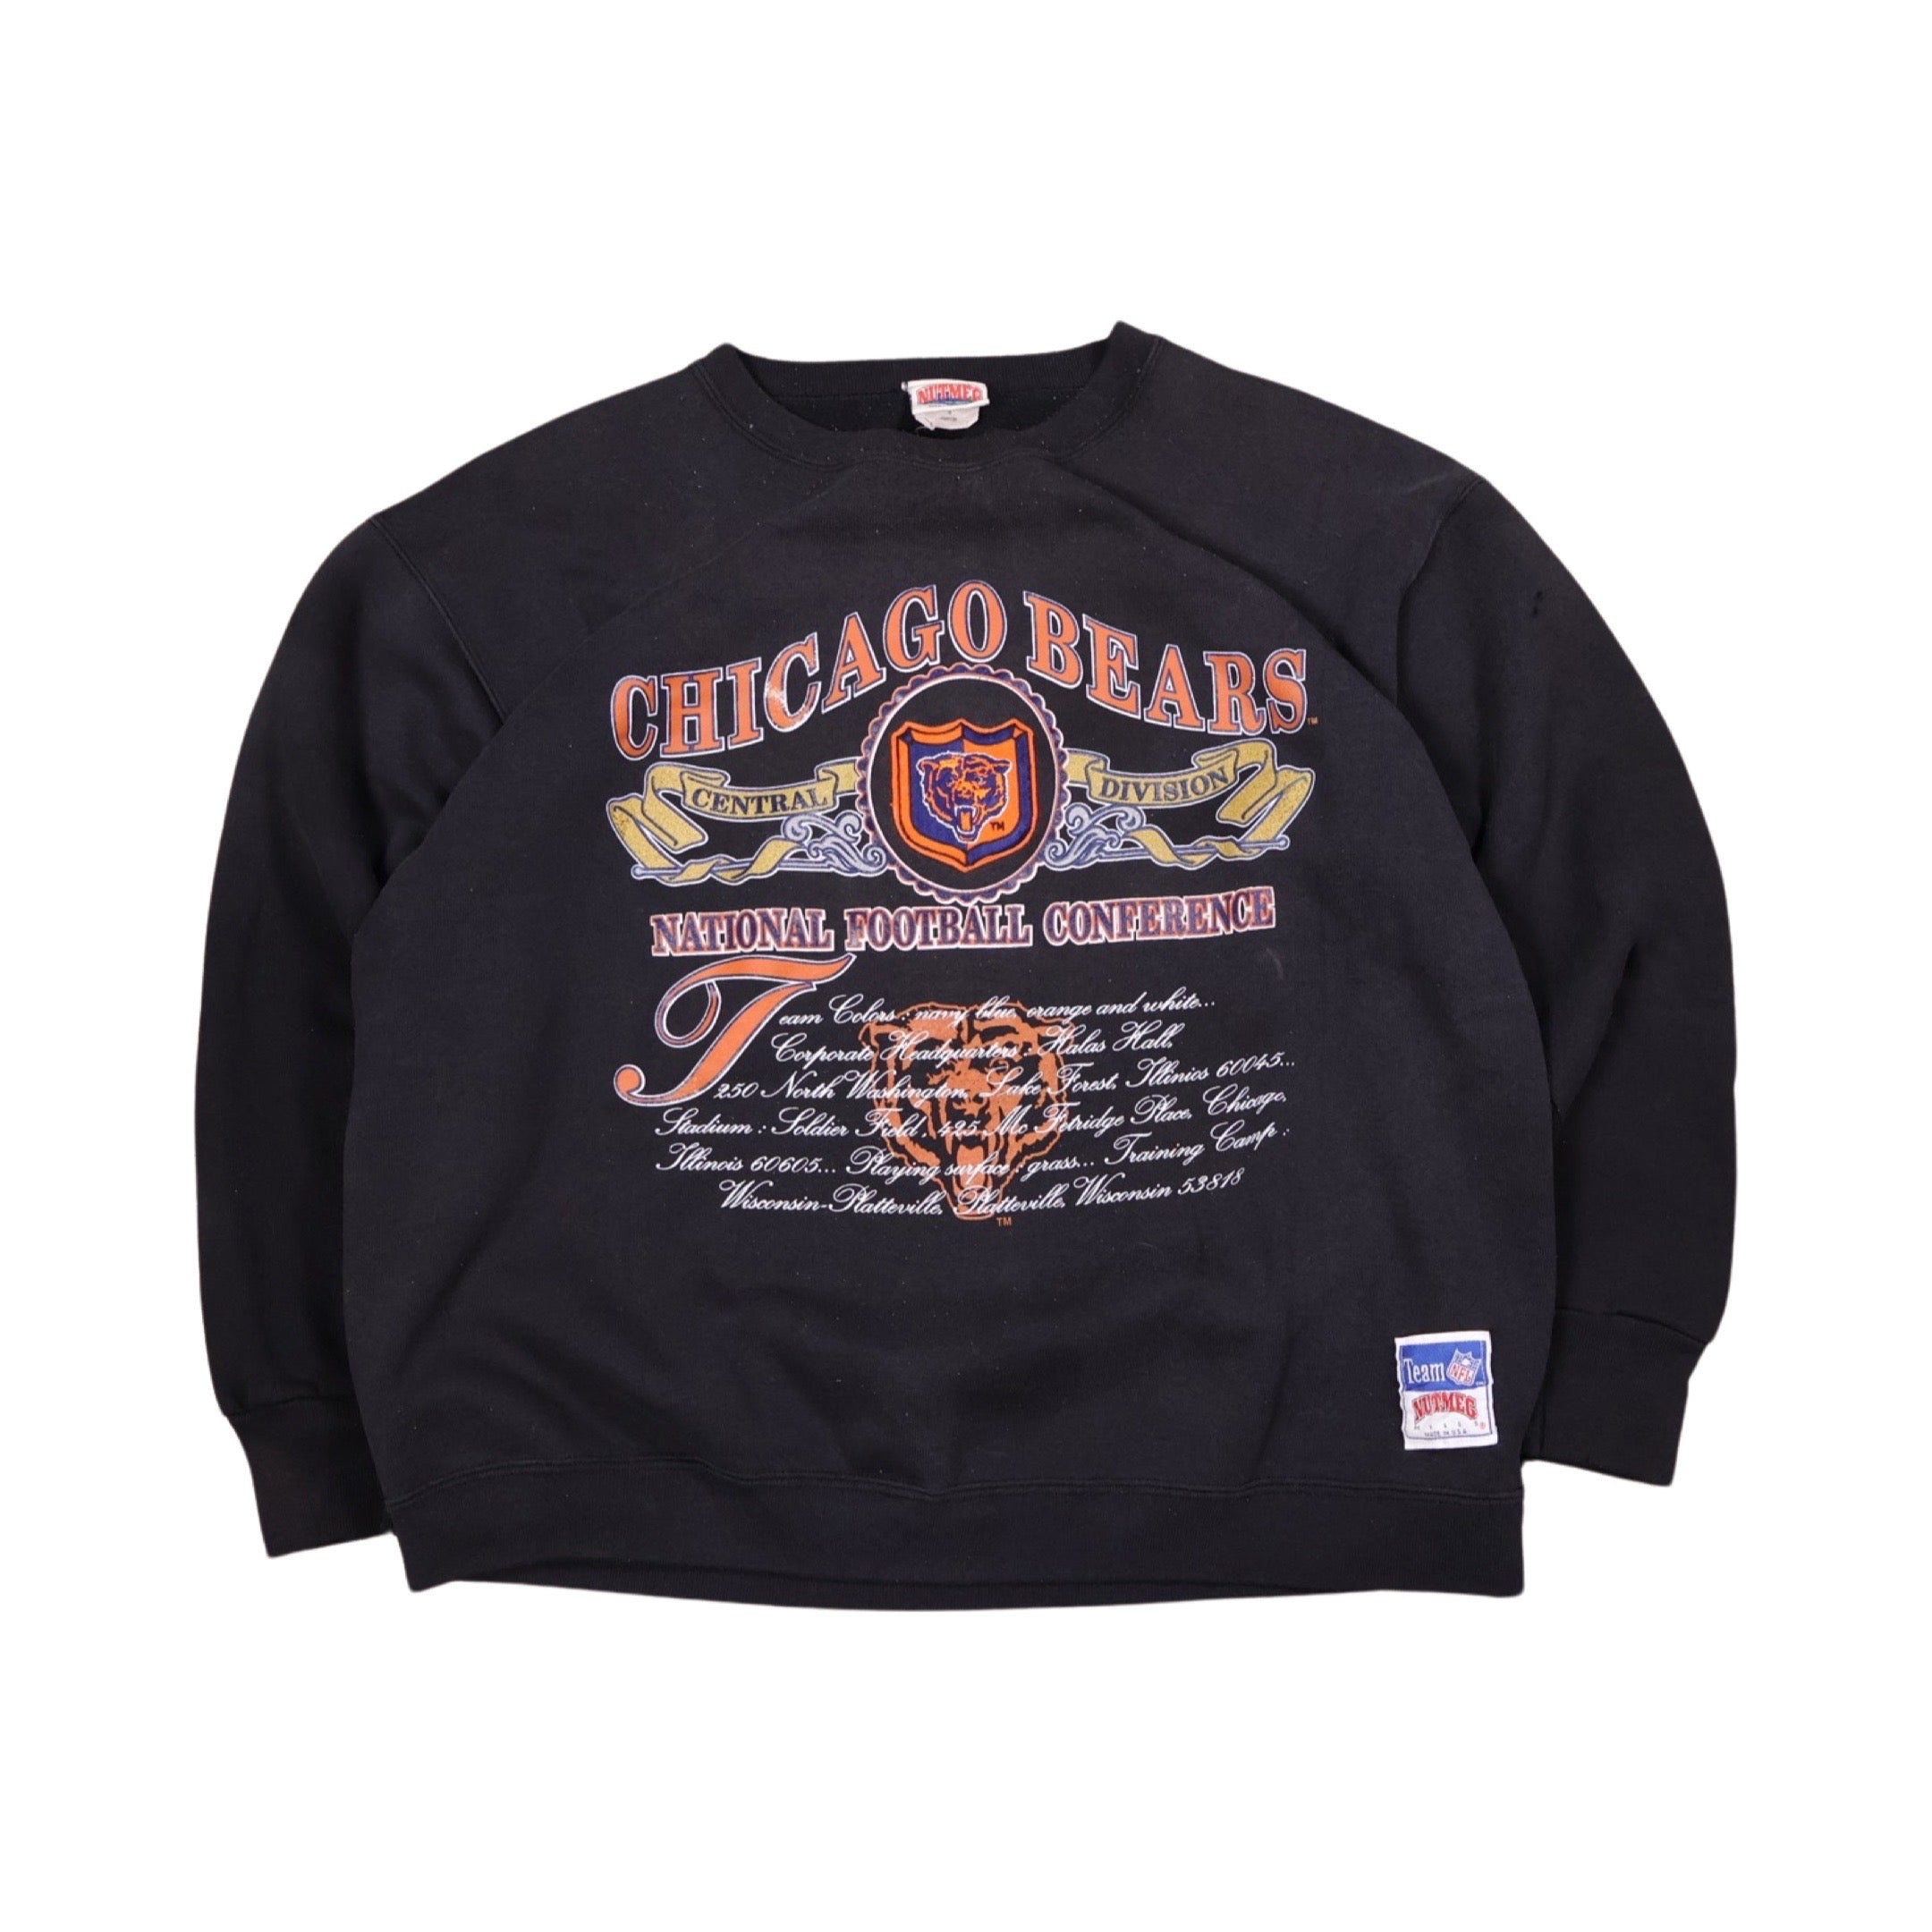 Chicago Bears 90s Sweater (Large)